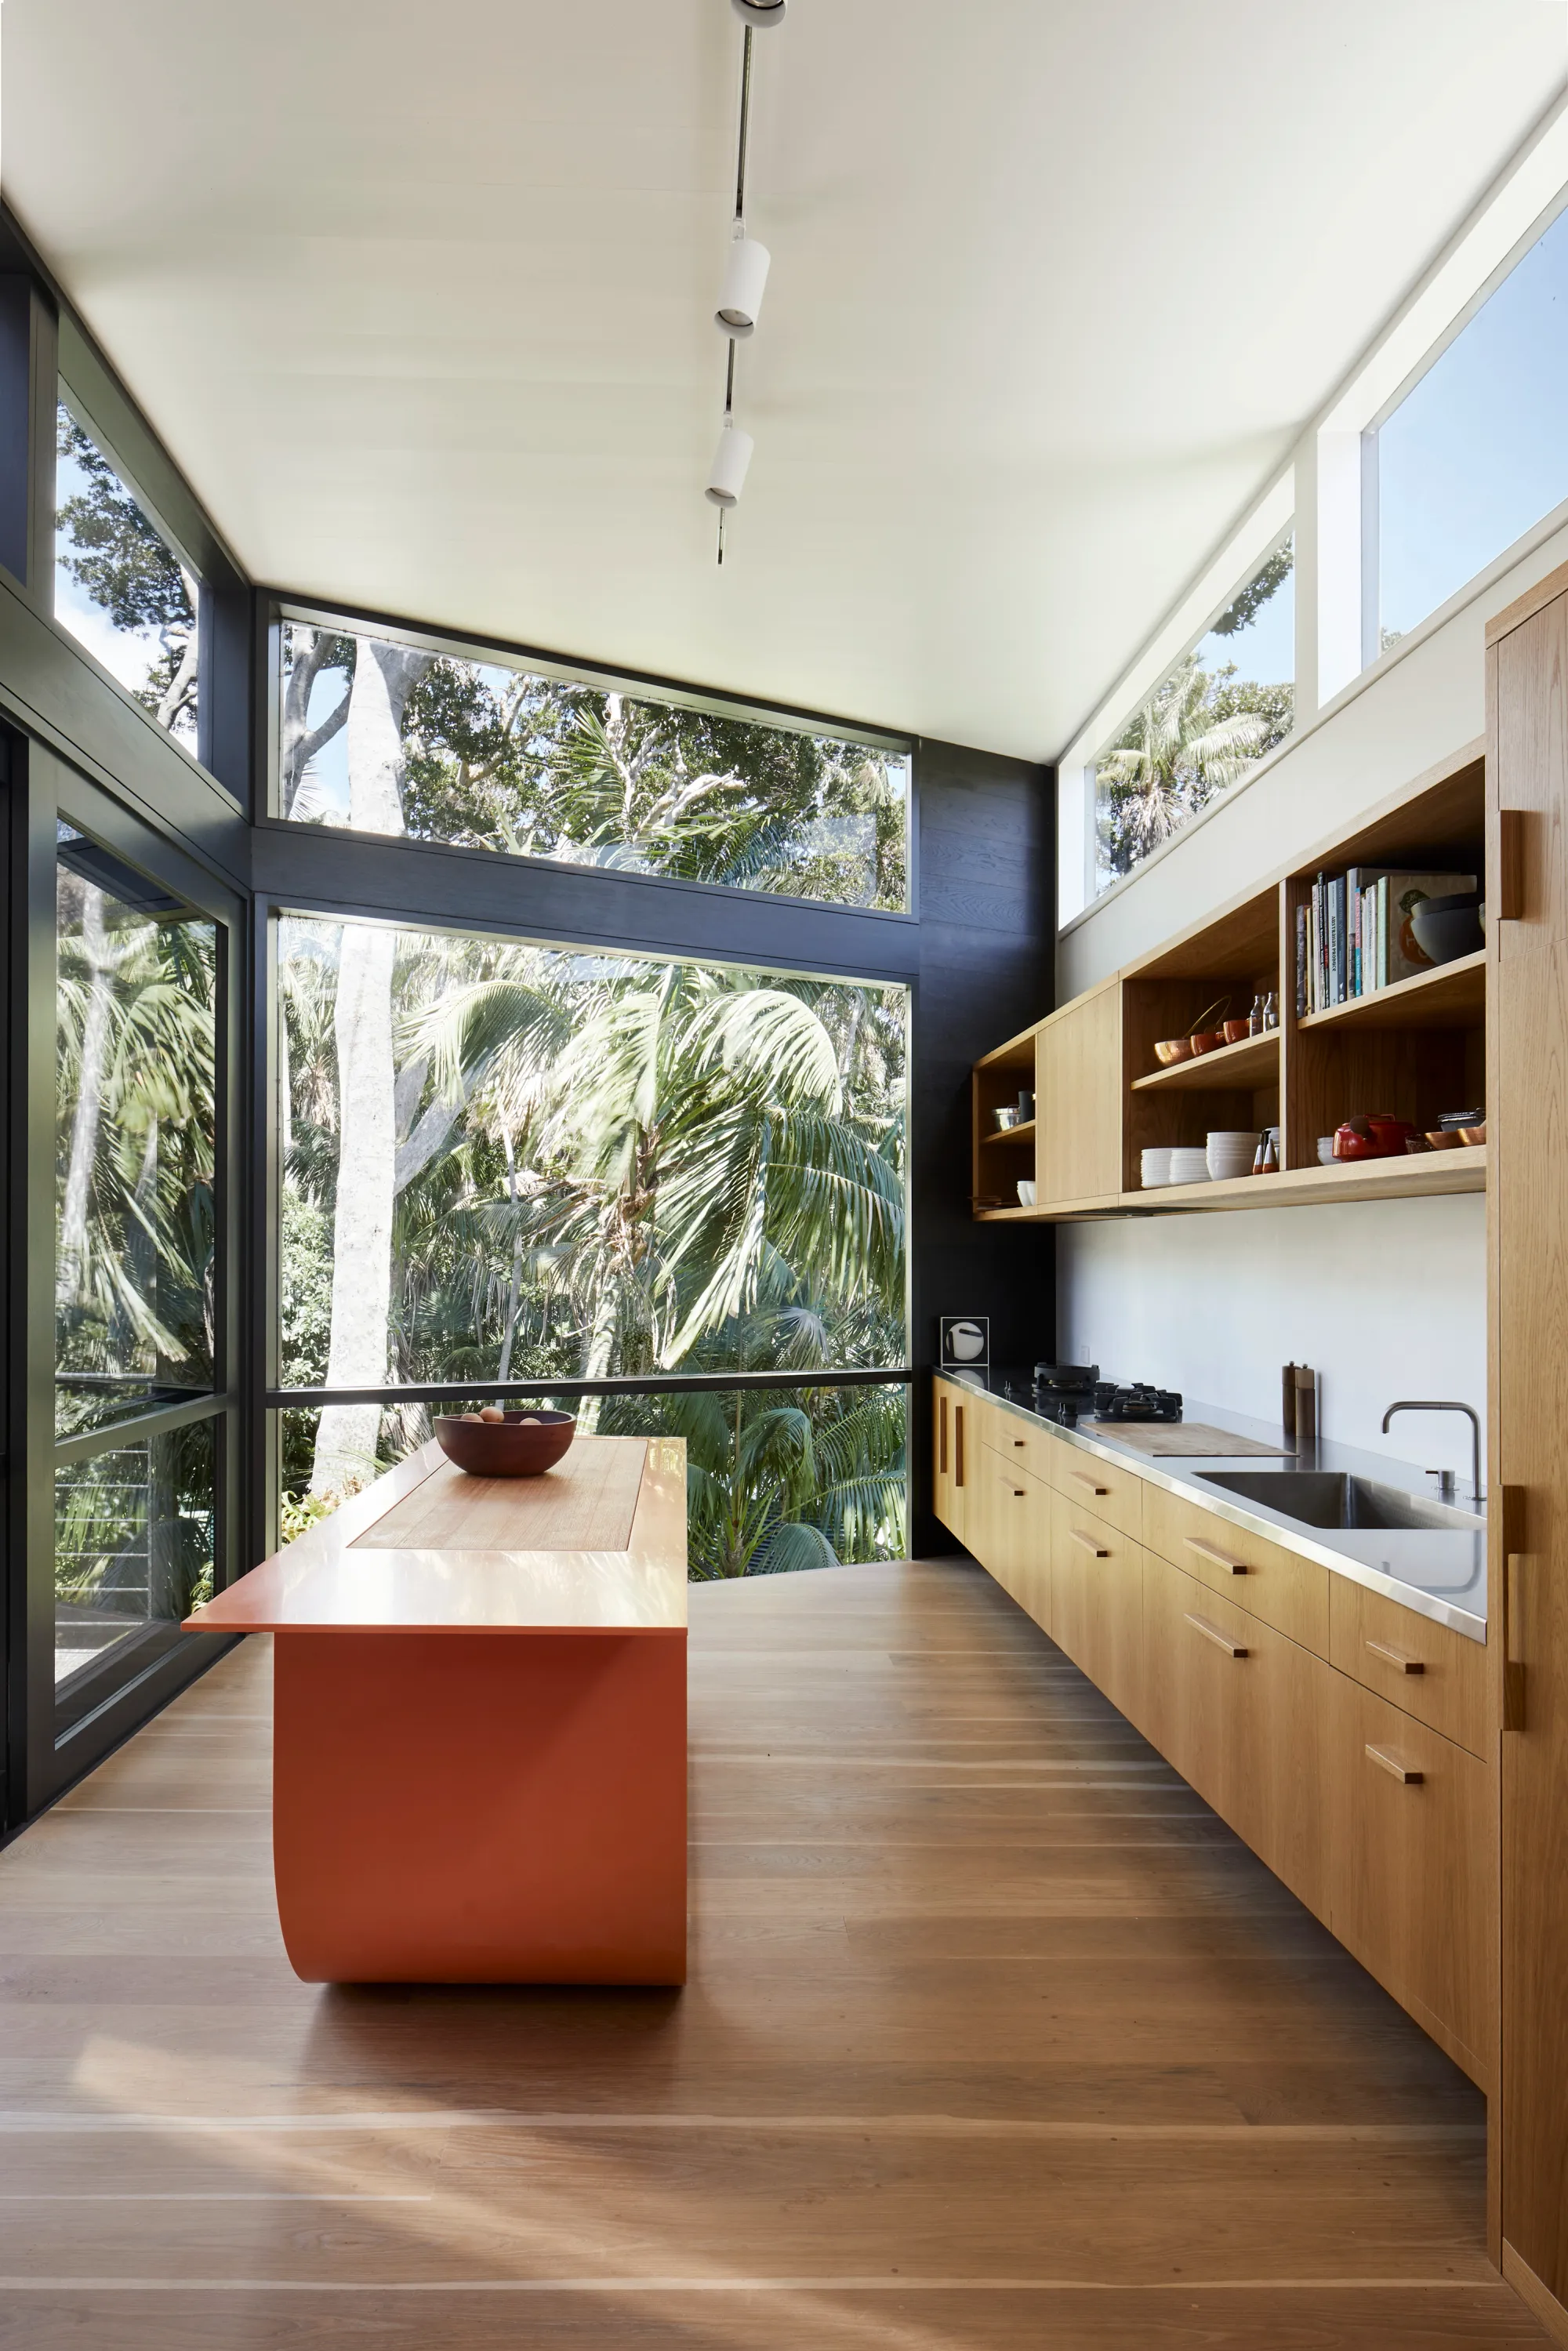 Island House by Derive Architecture & Design showing internal kitchen with island bench